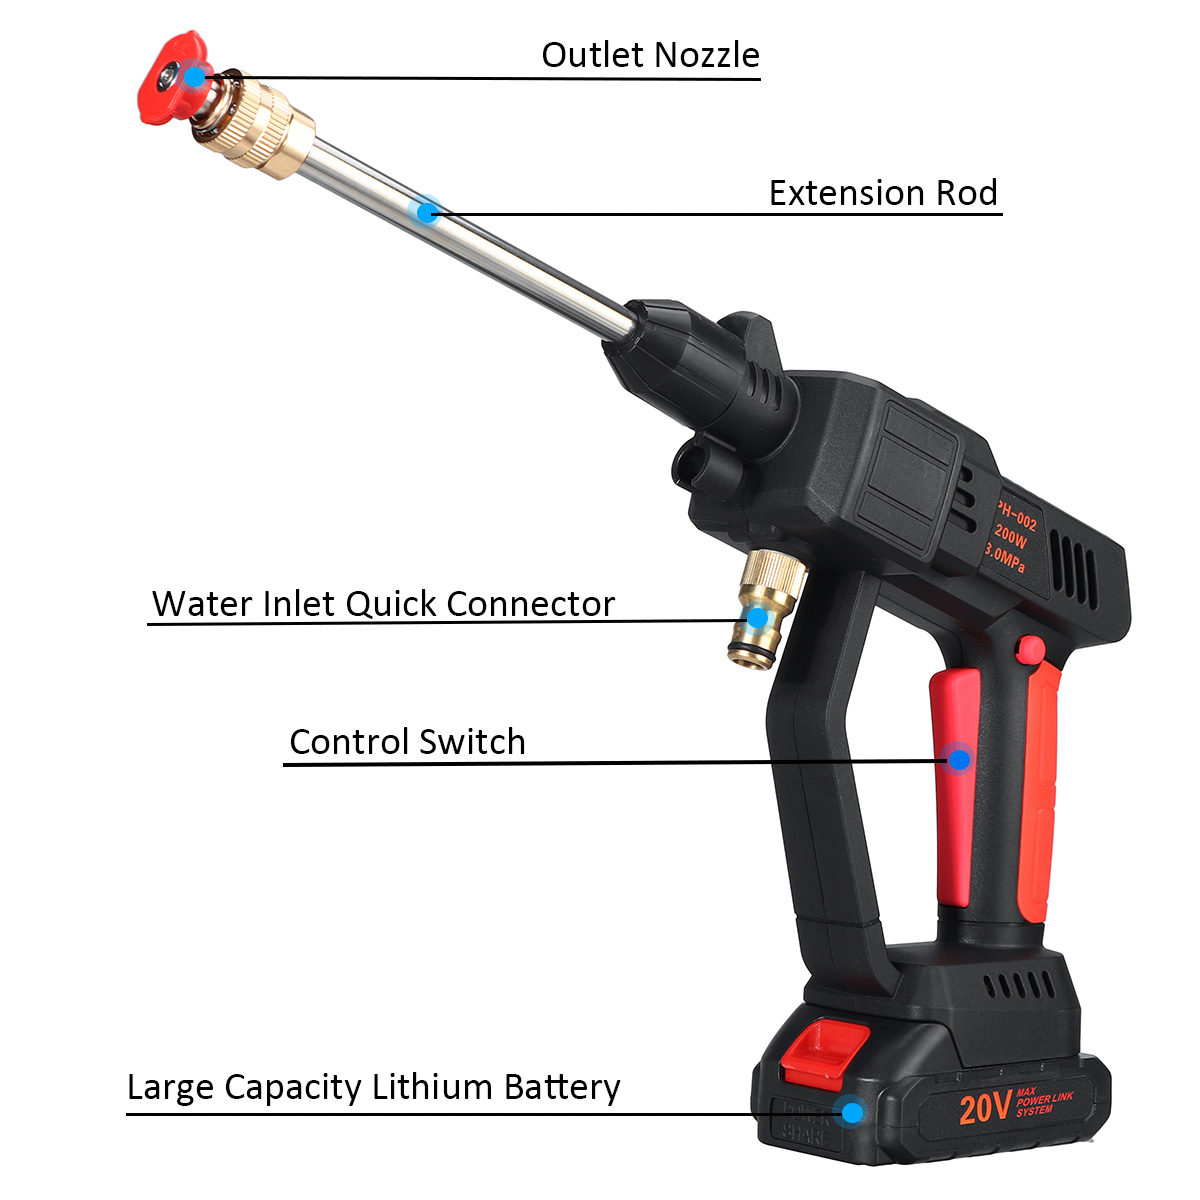 200W-Cordless-High-Pressure-Spayer-Guns-portable-Car-Washer-Vehicle-Cleaning-Tool-W-12-Battery-1872494-9